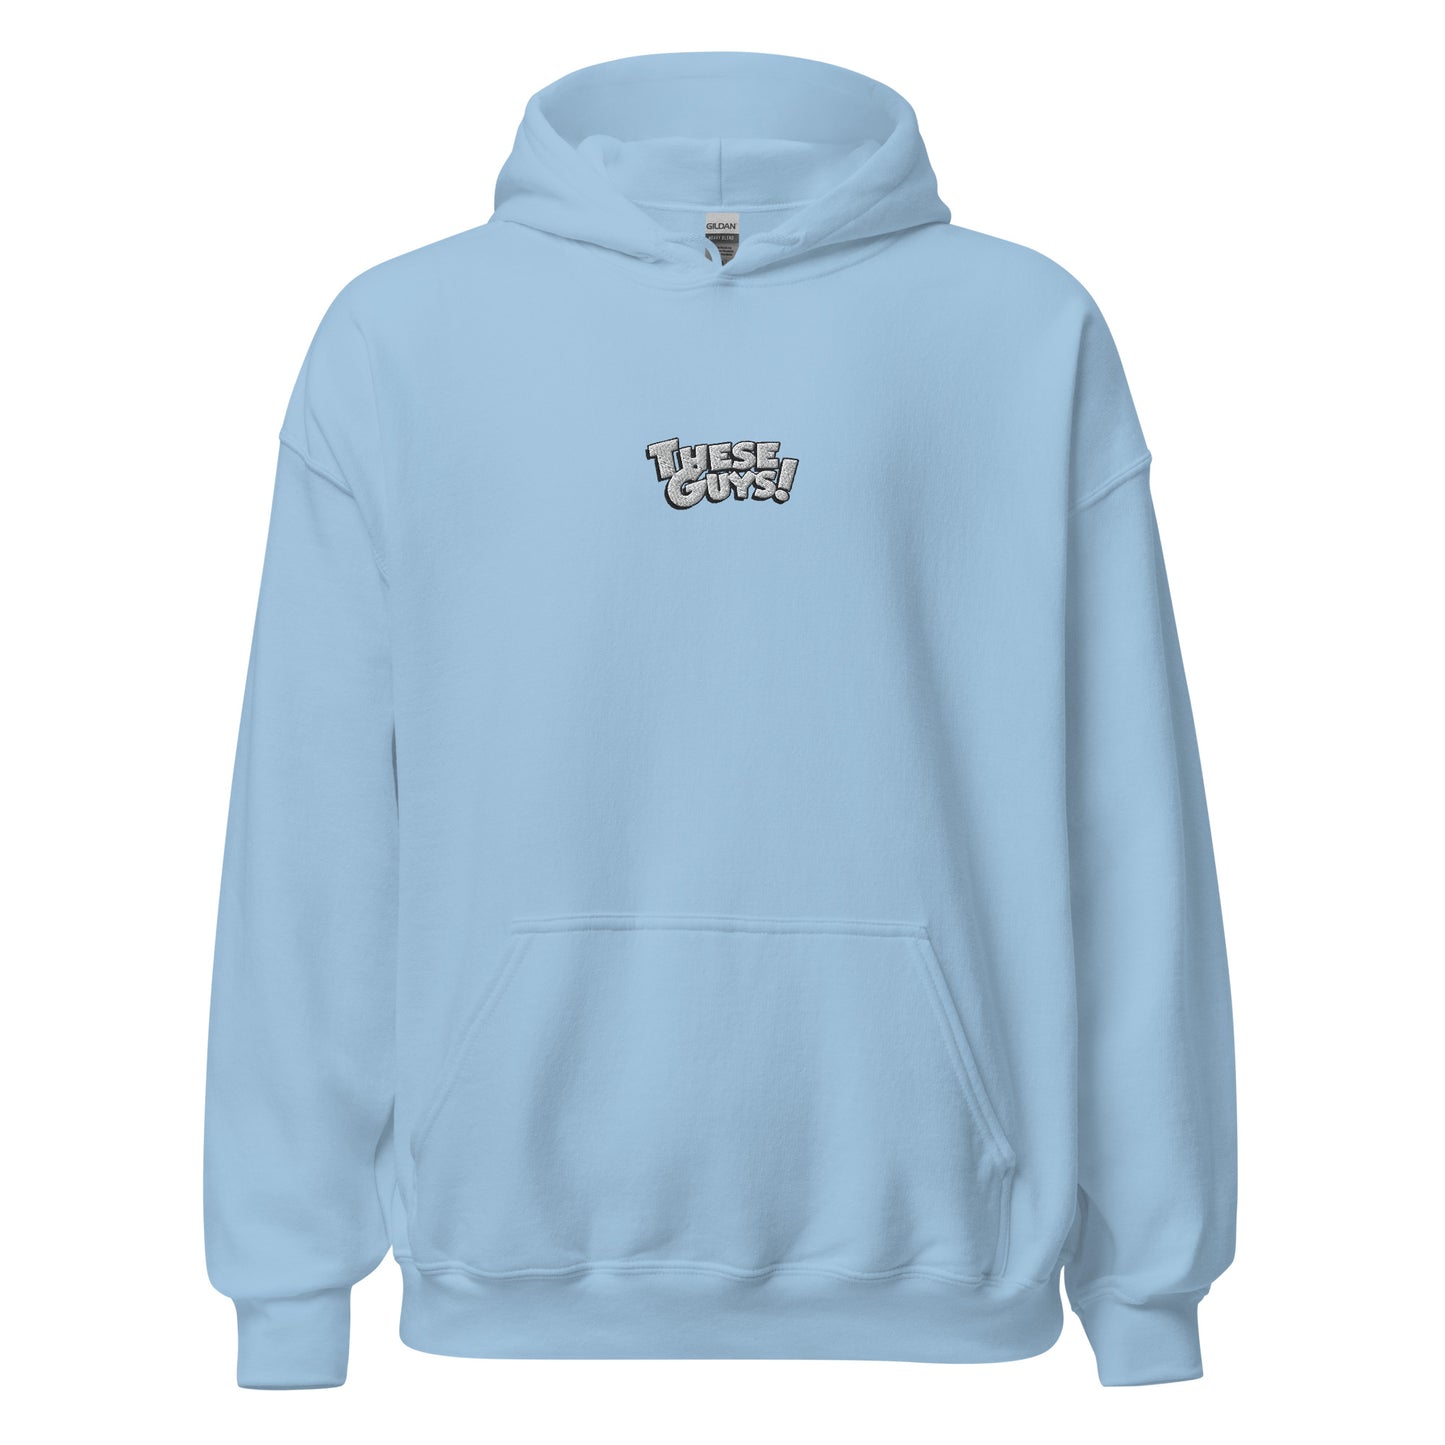 THESE GUYS! hoodie